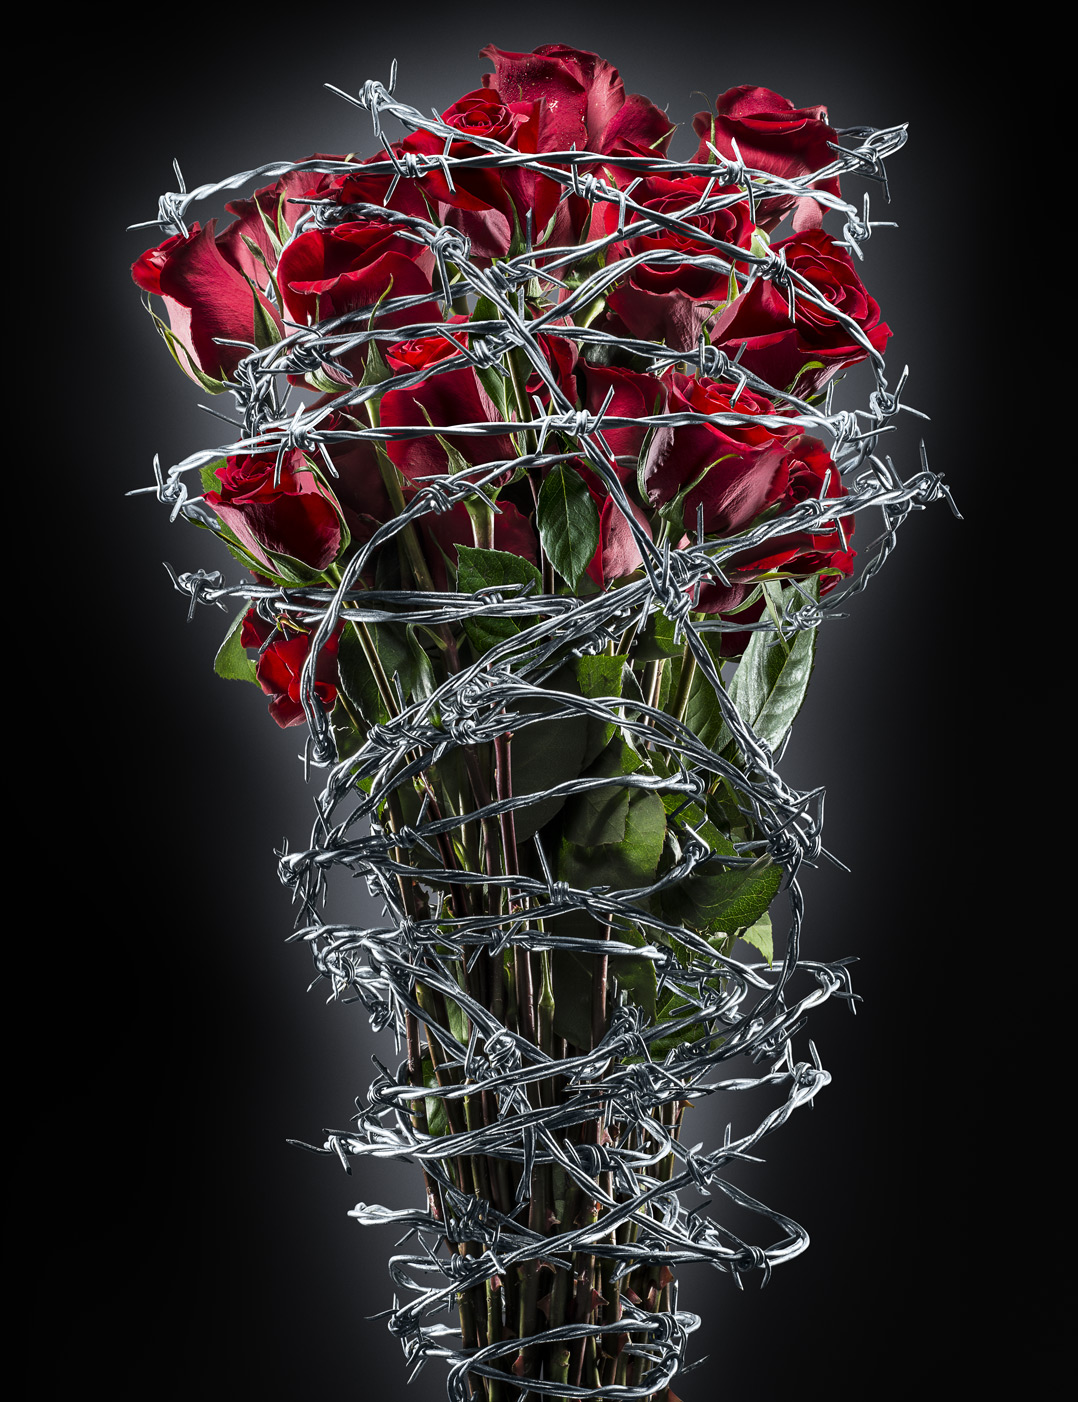 Roses_BarbedWire_M3_1402pxH